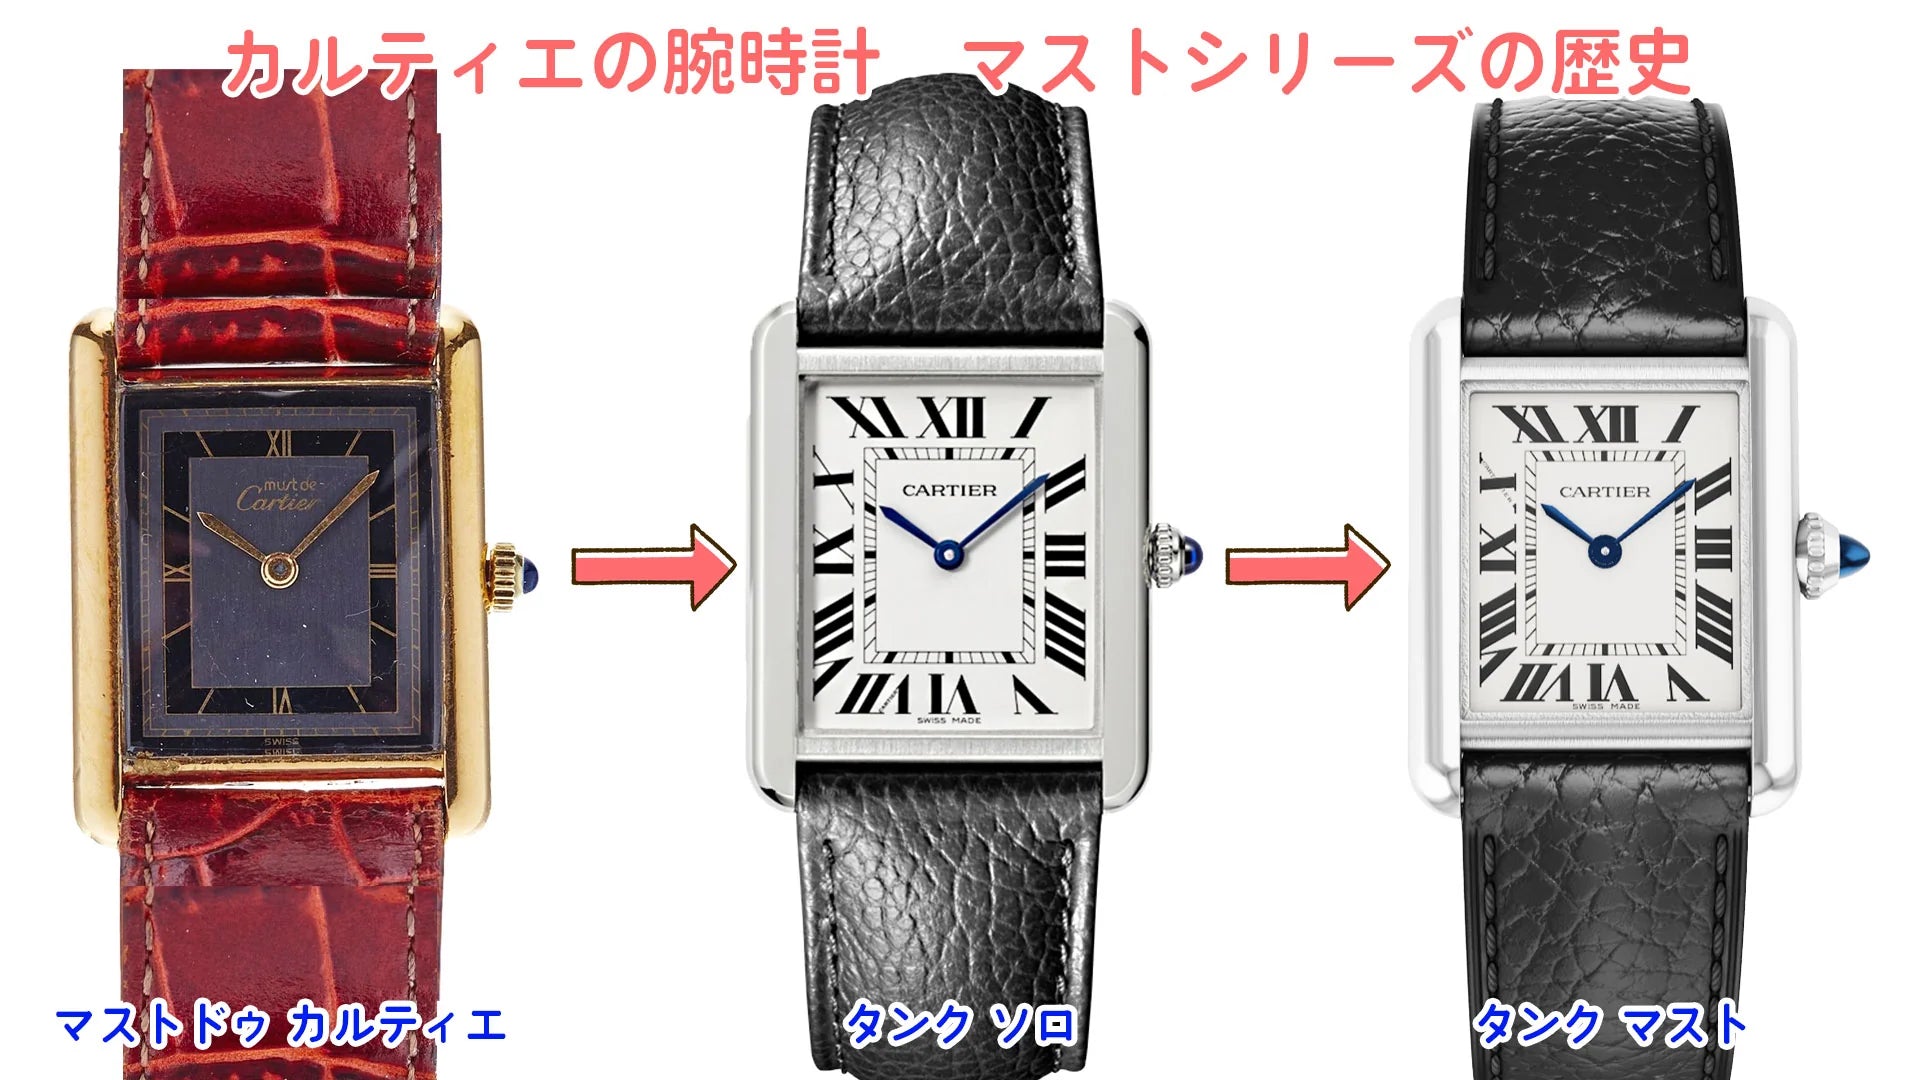 The evolution of Cartier watches: Mast Tank ⇨ Tank Solo ⇨ Tank Mast